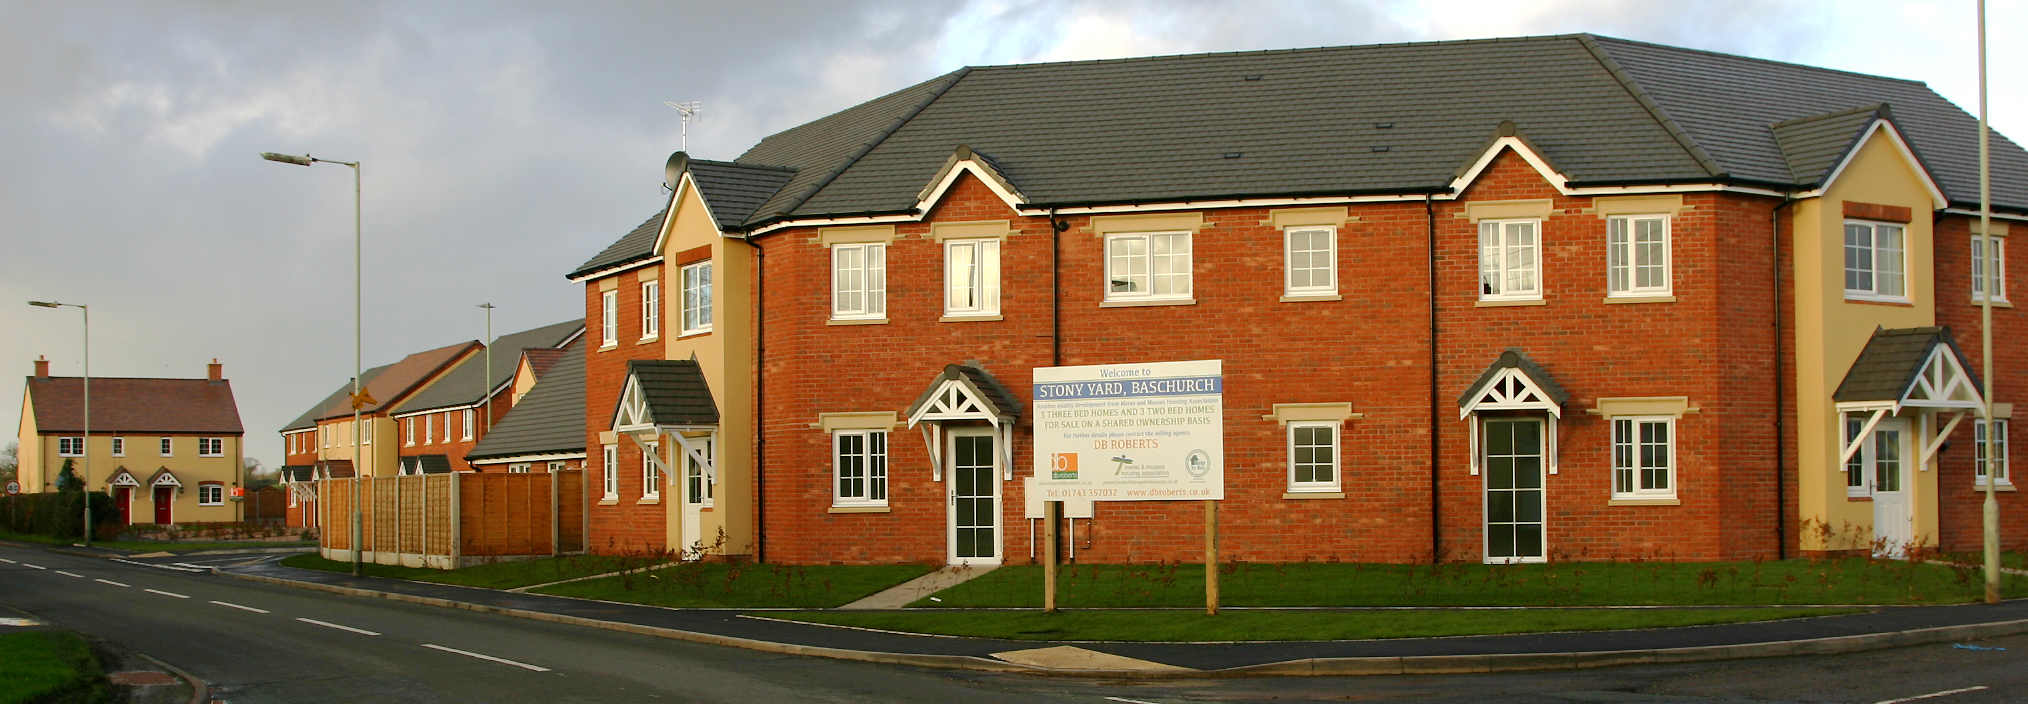 New build affordable housing by MELT Property at Baschurch, Shropshire